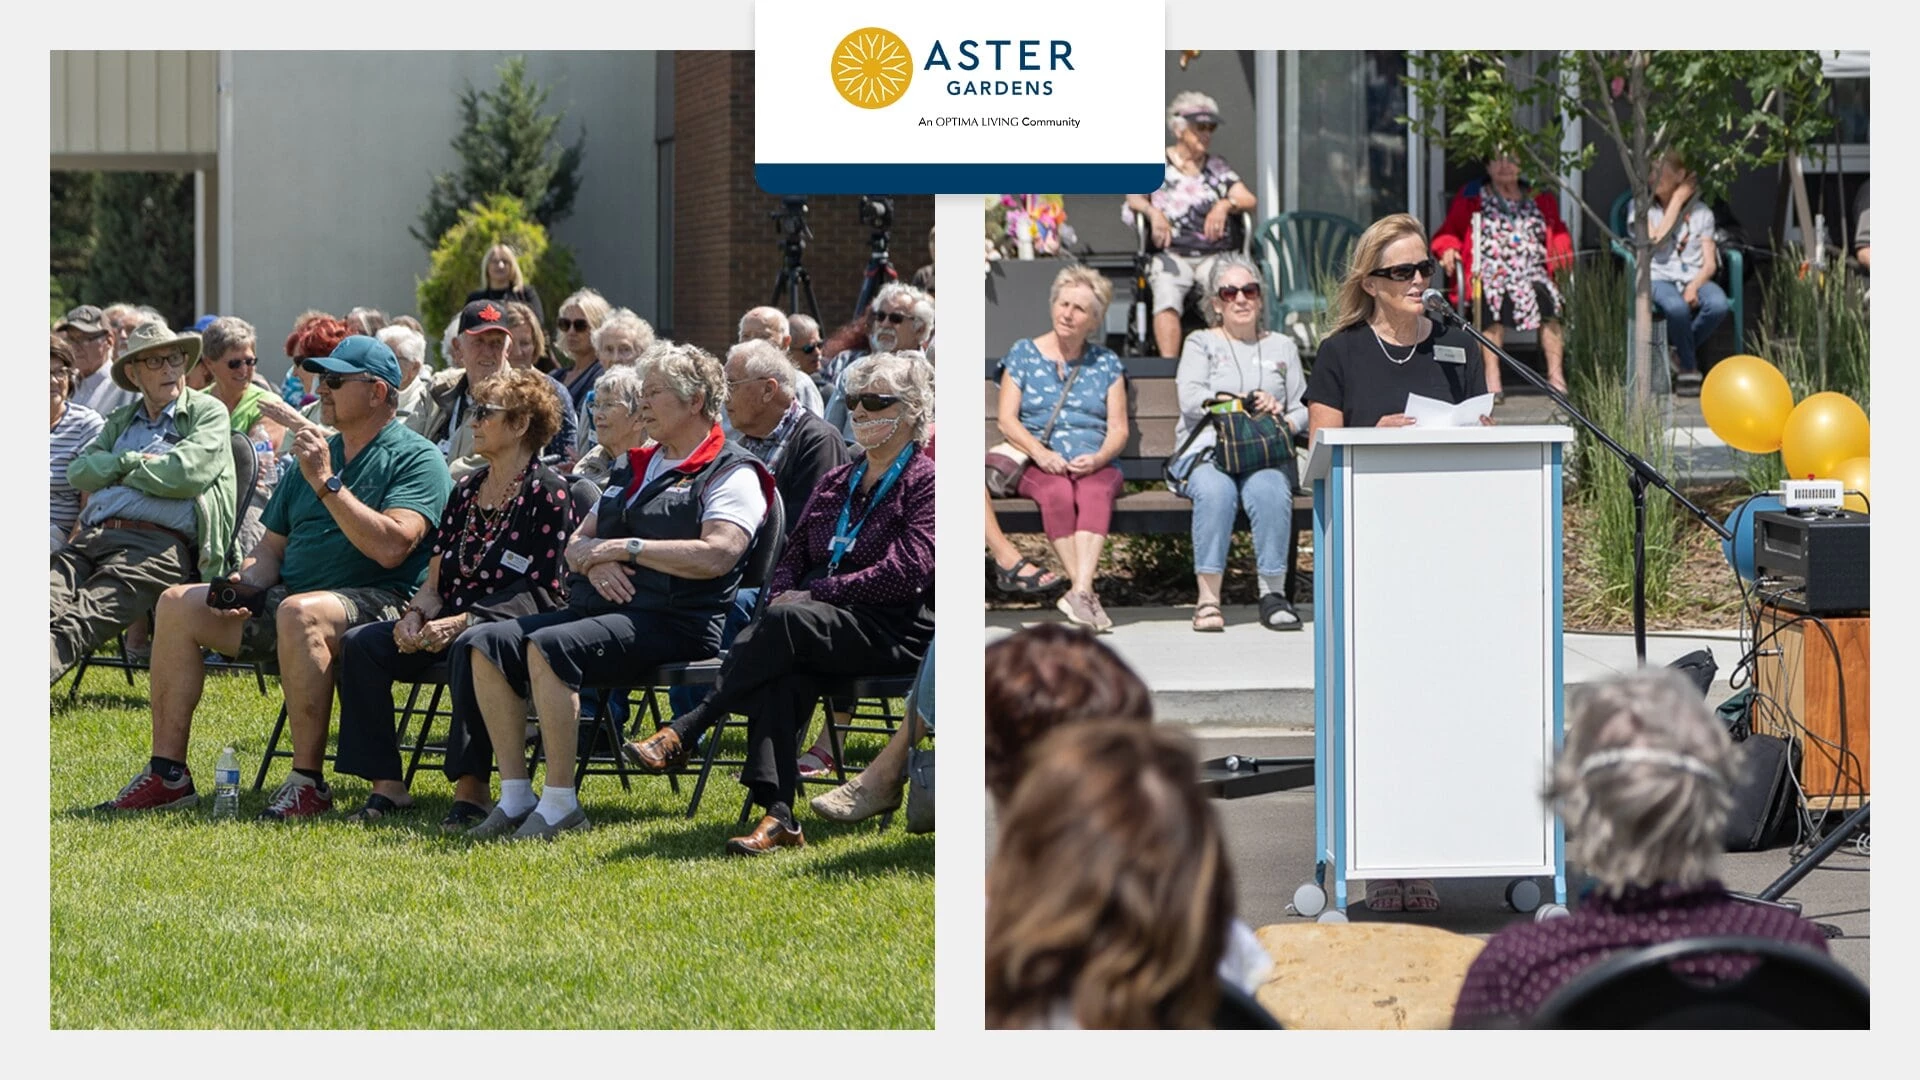 Grand Opening Ceremony at Aster Gardens and a lady giving speech